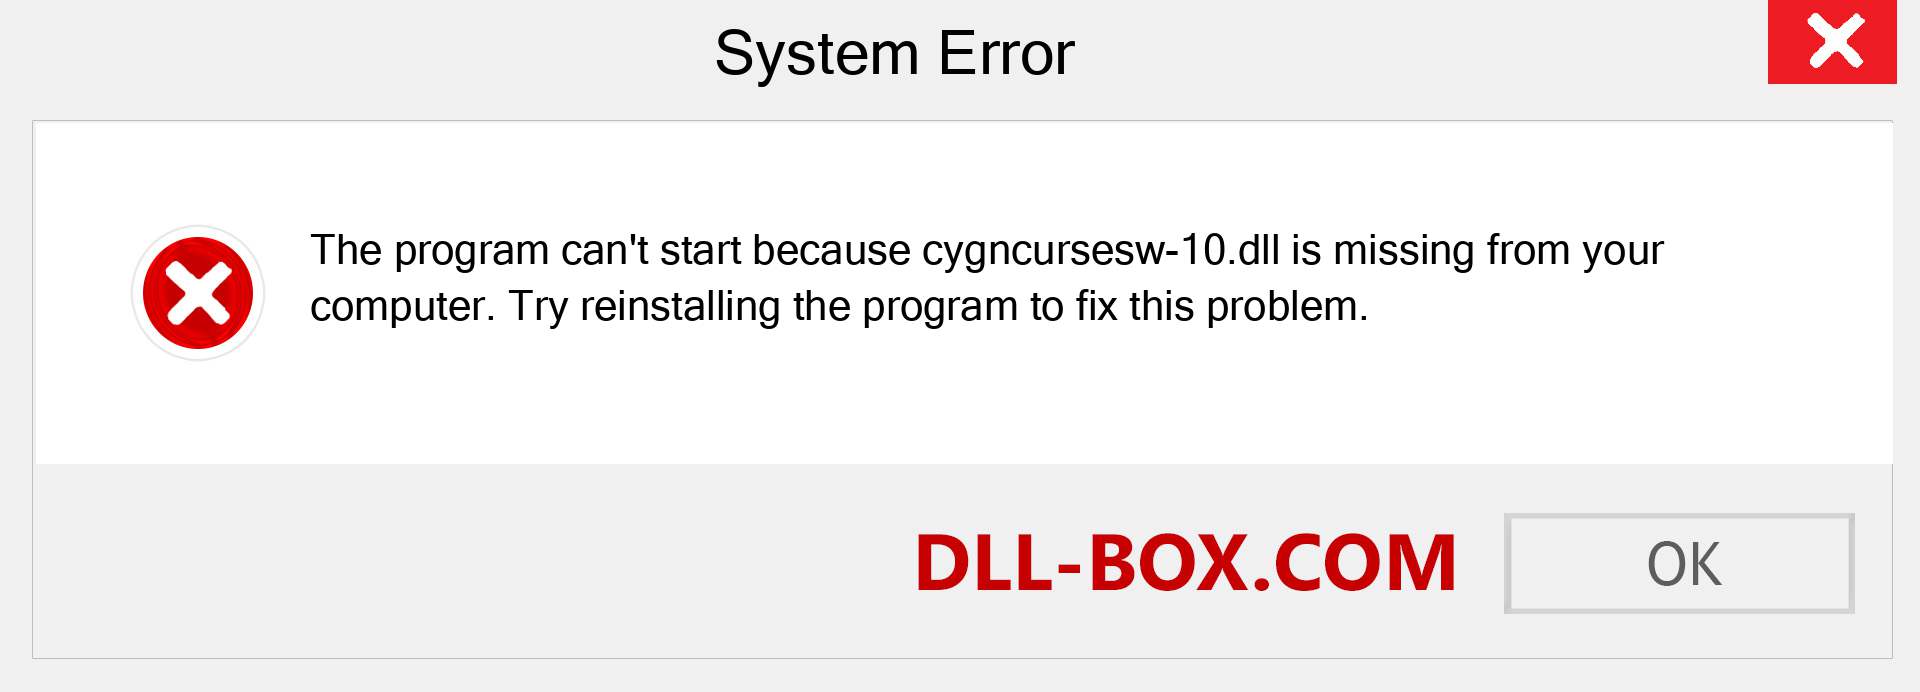  cygncursesw-10.dll file is missing?. Download for Windows 7, 8, 10 - Fix  cygncursesw-10 dll Missing Error on Windows, photos, images